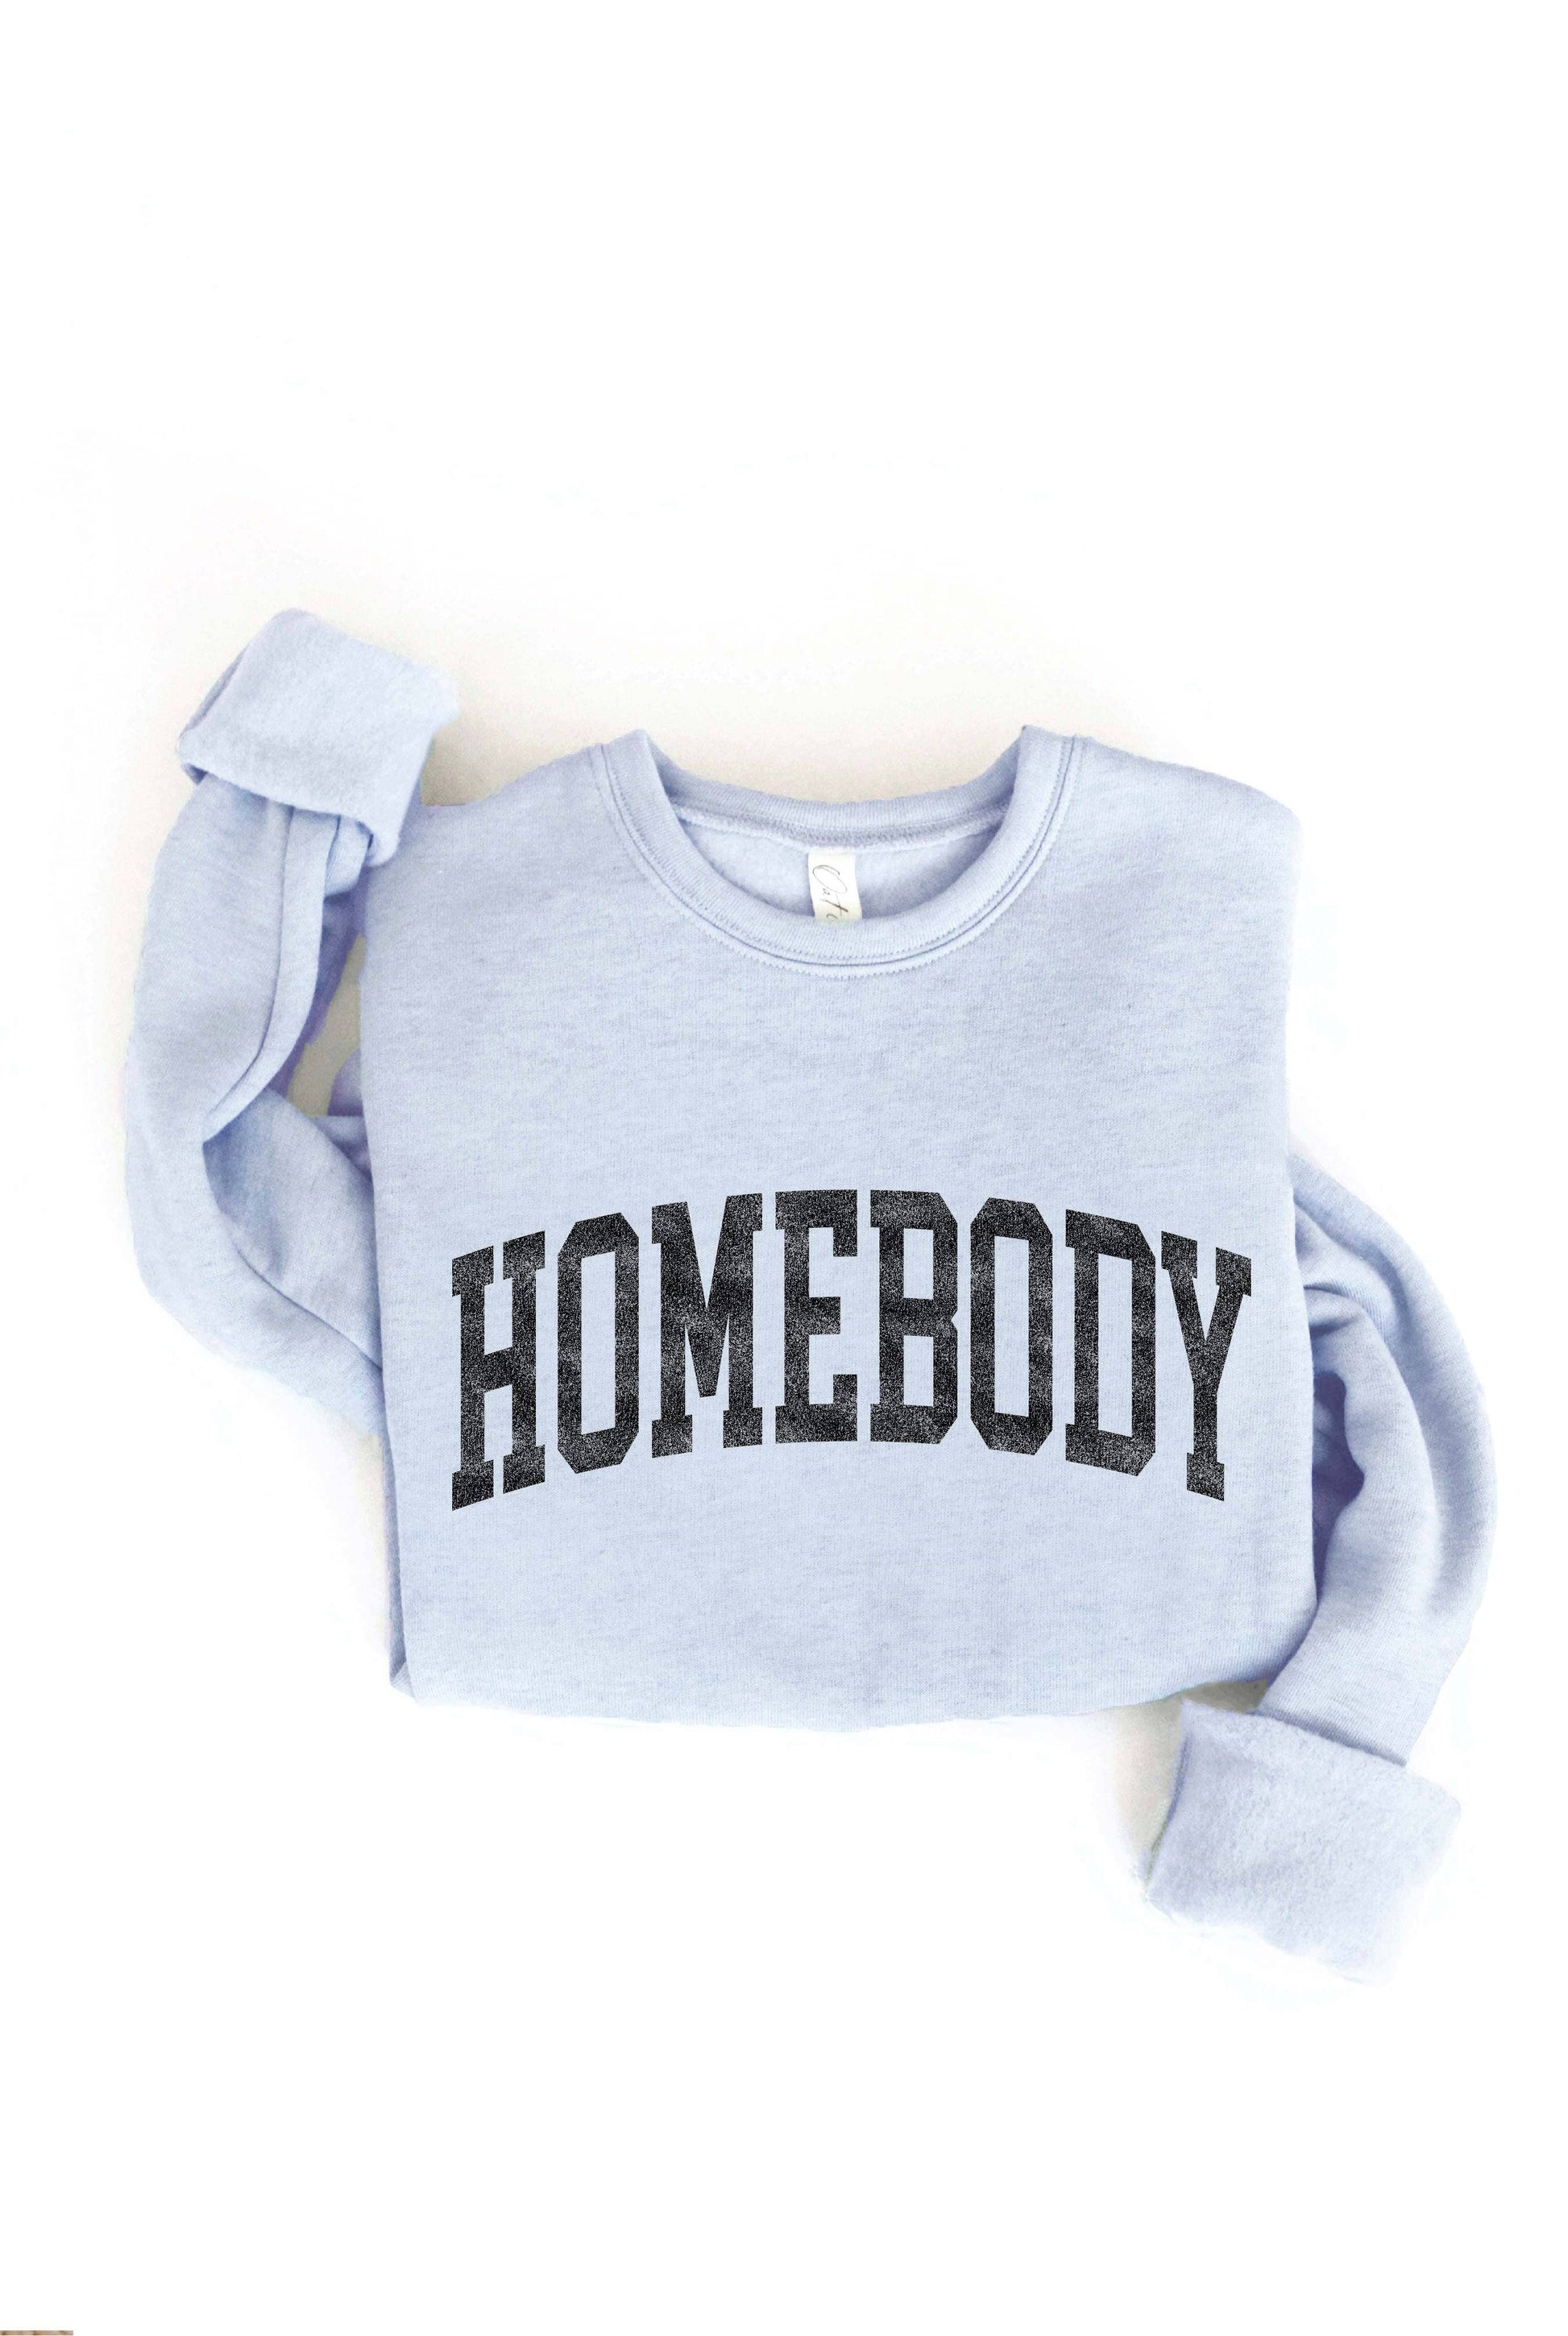 HOMEBODY Graphic Sweatshirt: LIGHT BLUE Spring-Summer OAT COLLECTIVE